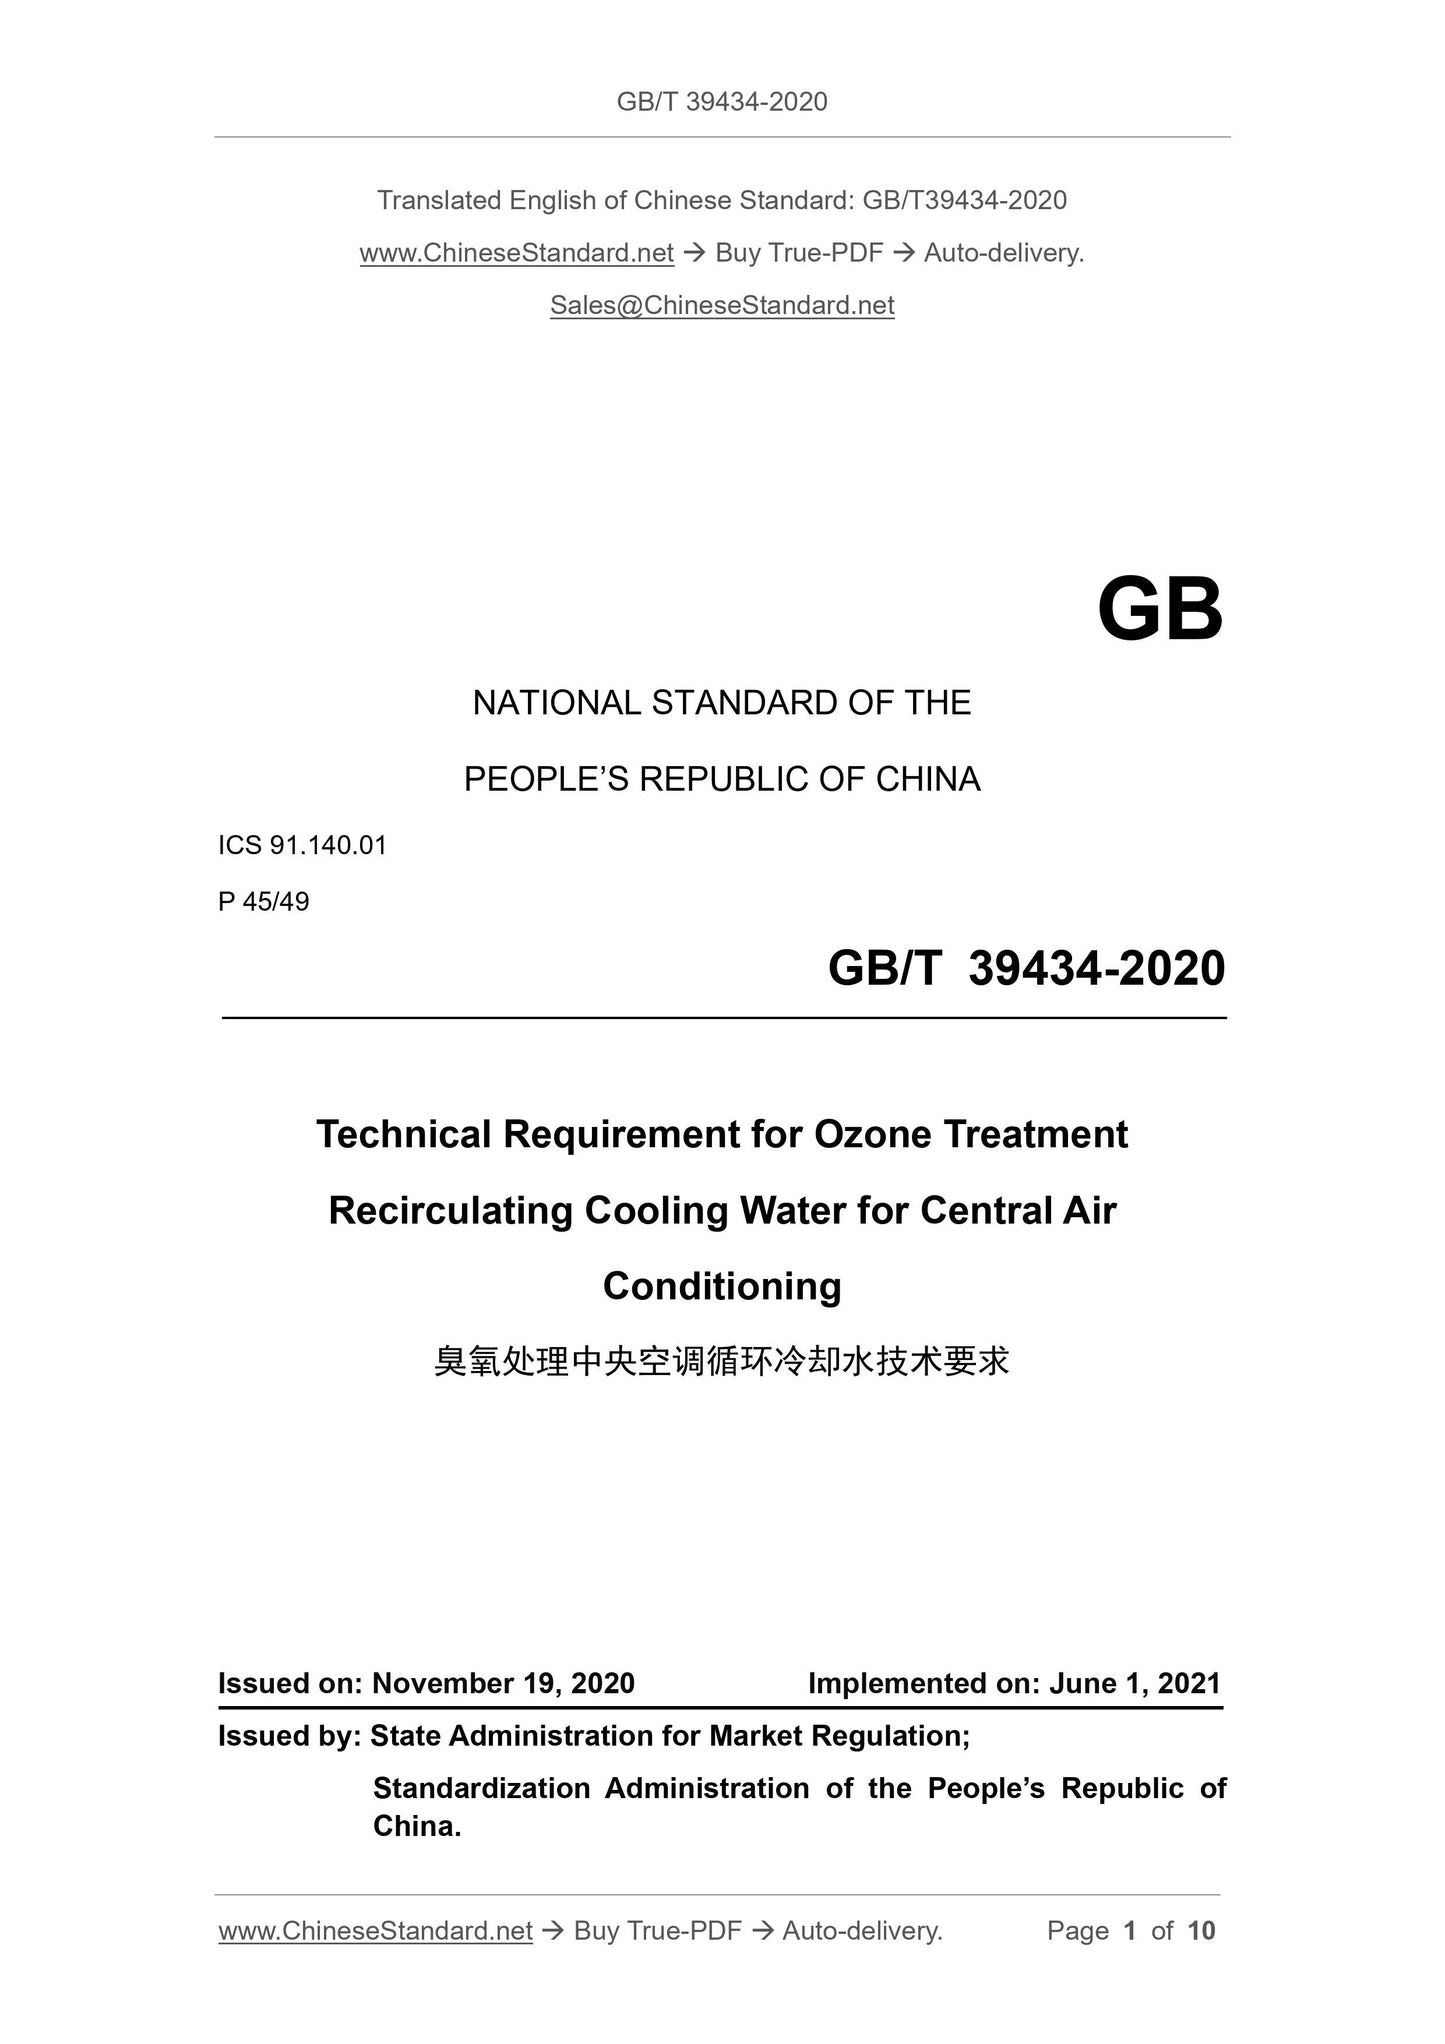 GB/T 39434-2020 Page 1